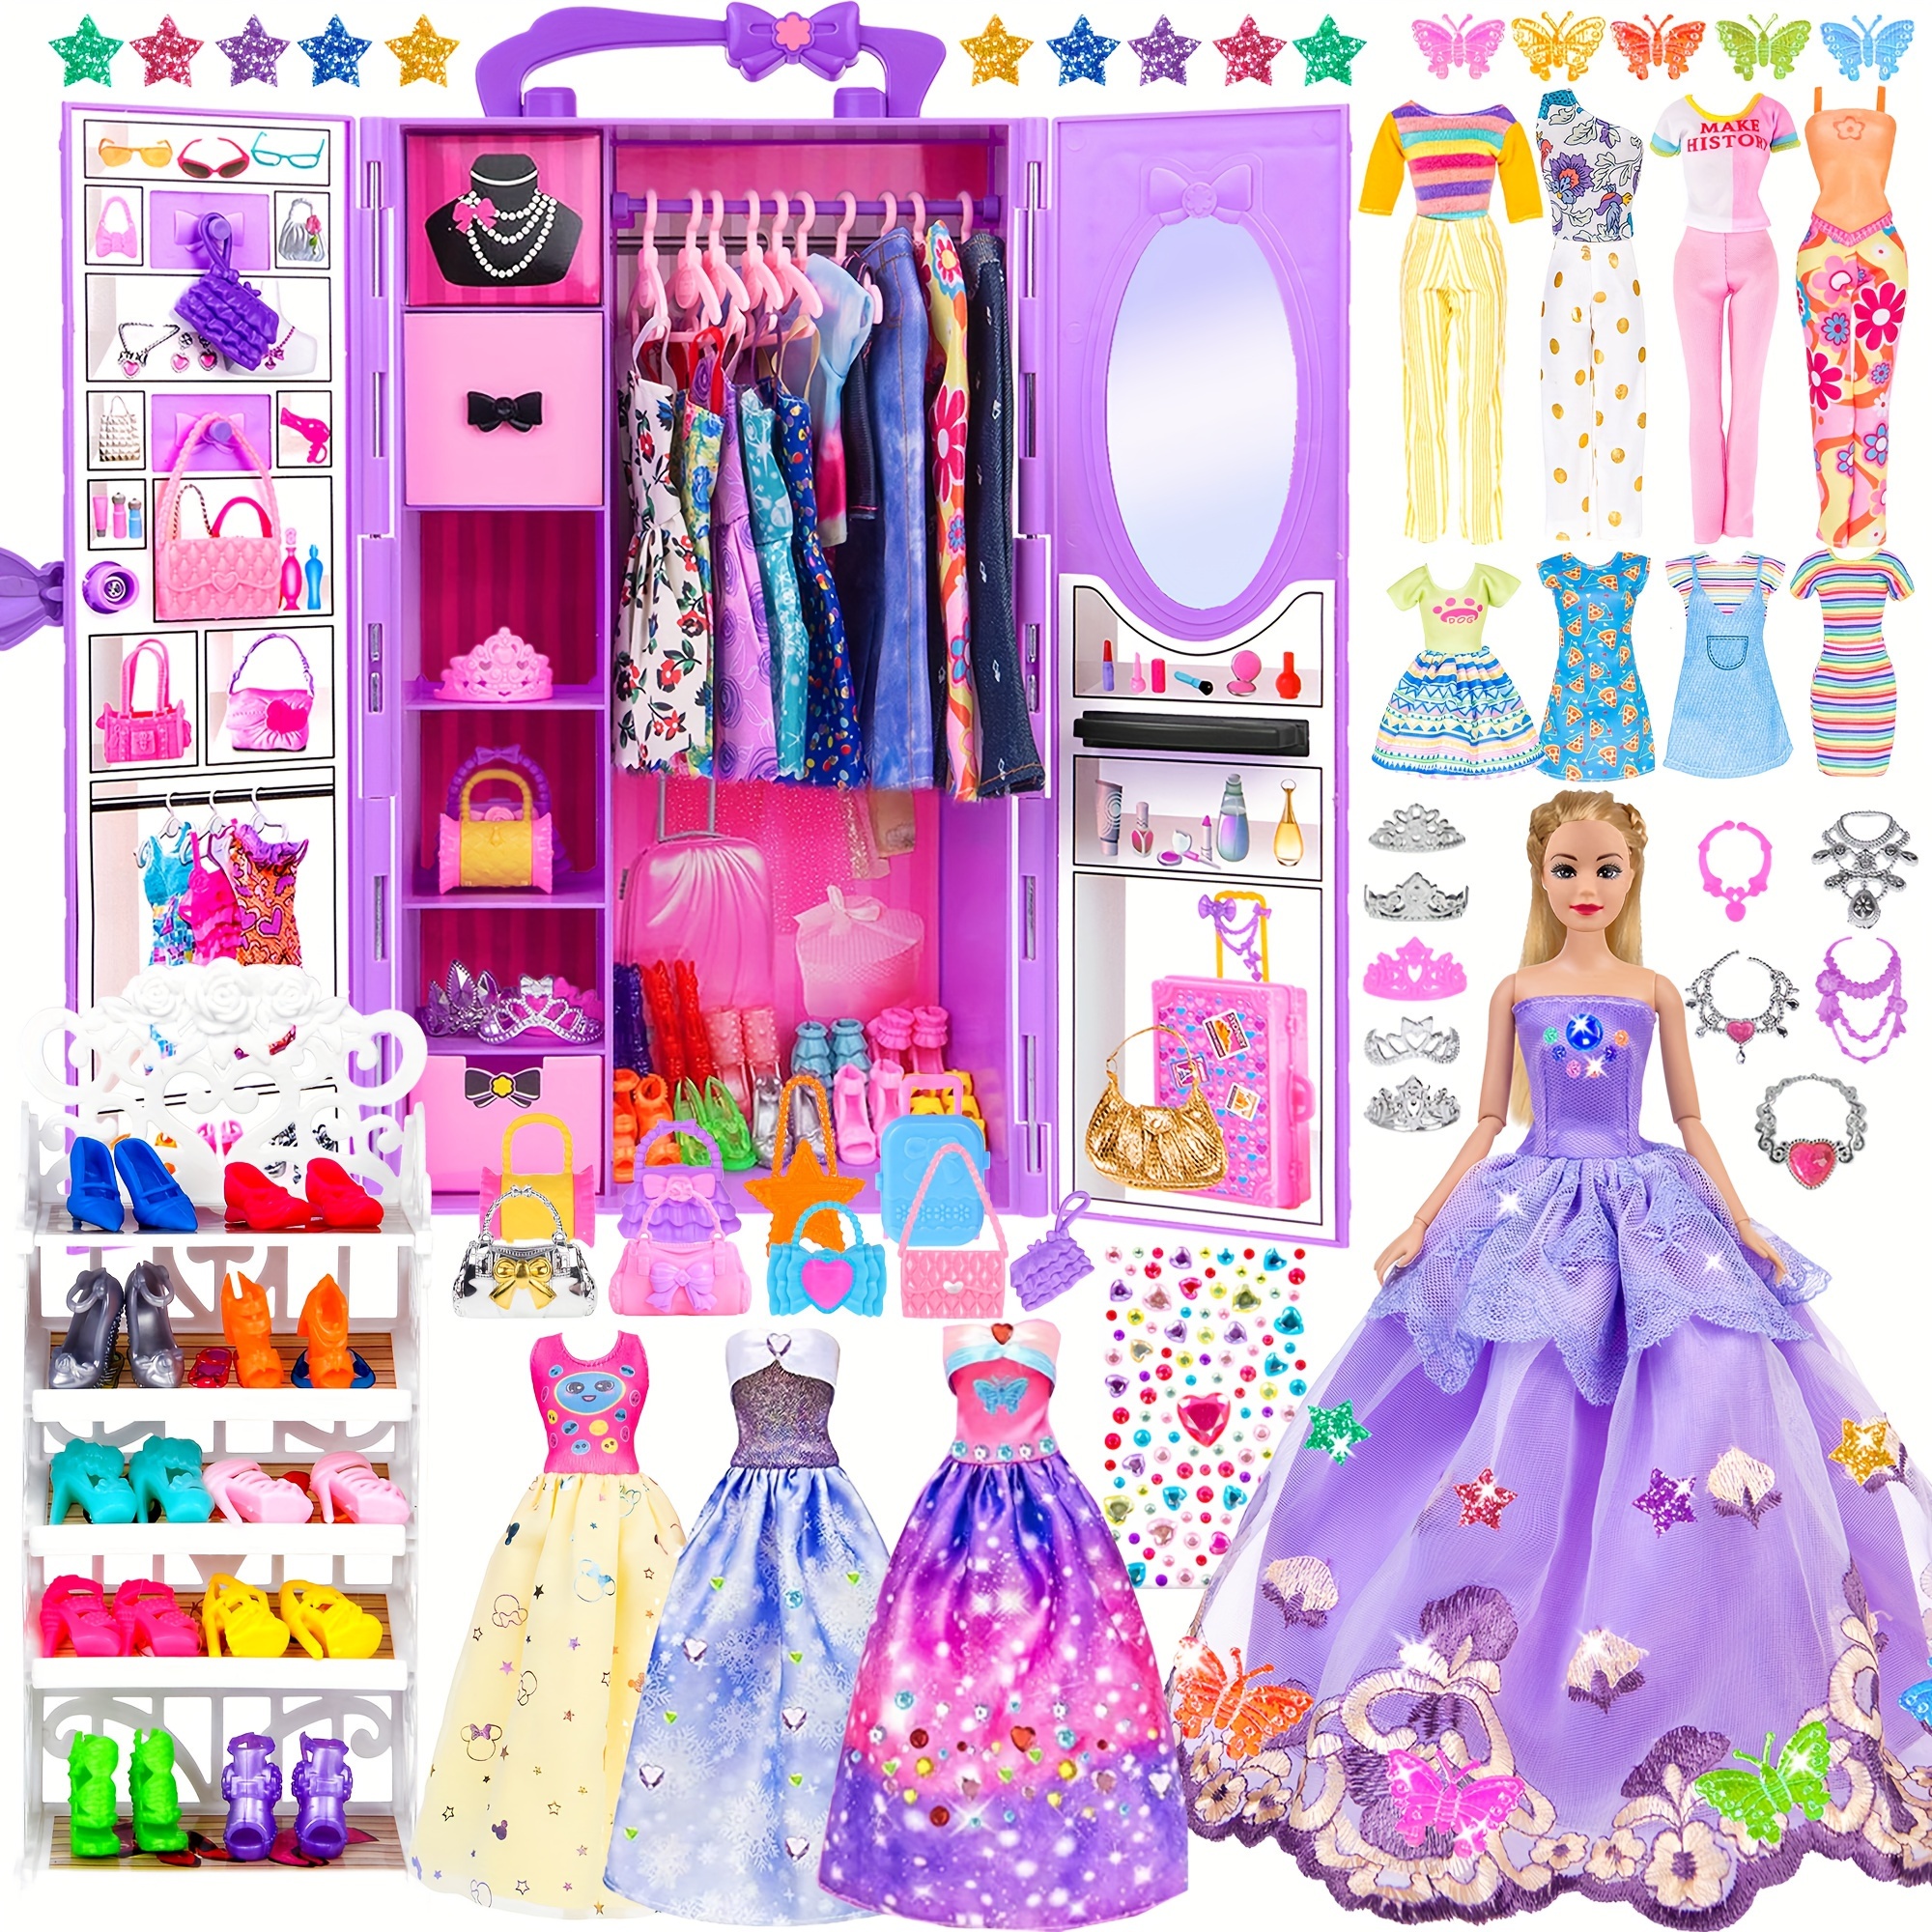 

Fashion 91pcs 11.5 Inch Girl Doll With Clothes Accessories And Closet, Princess Gowns, Fashion Dresses, Outfits, Swimsuits, Shoes, Hangers, Doll Dress Up Toys For Girls Kids Toddlers Toy Gifts